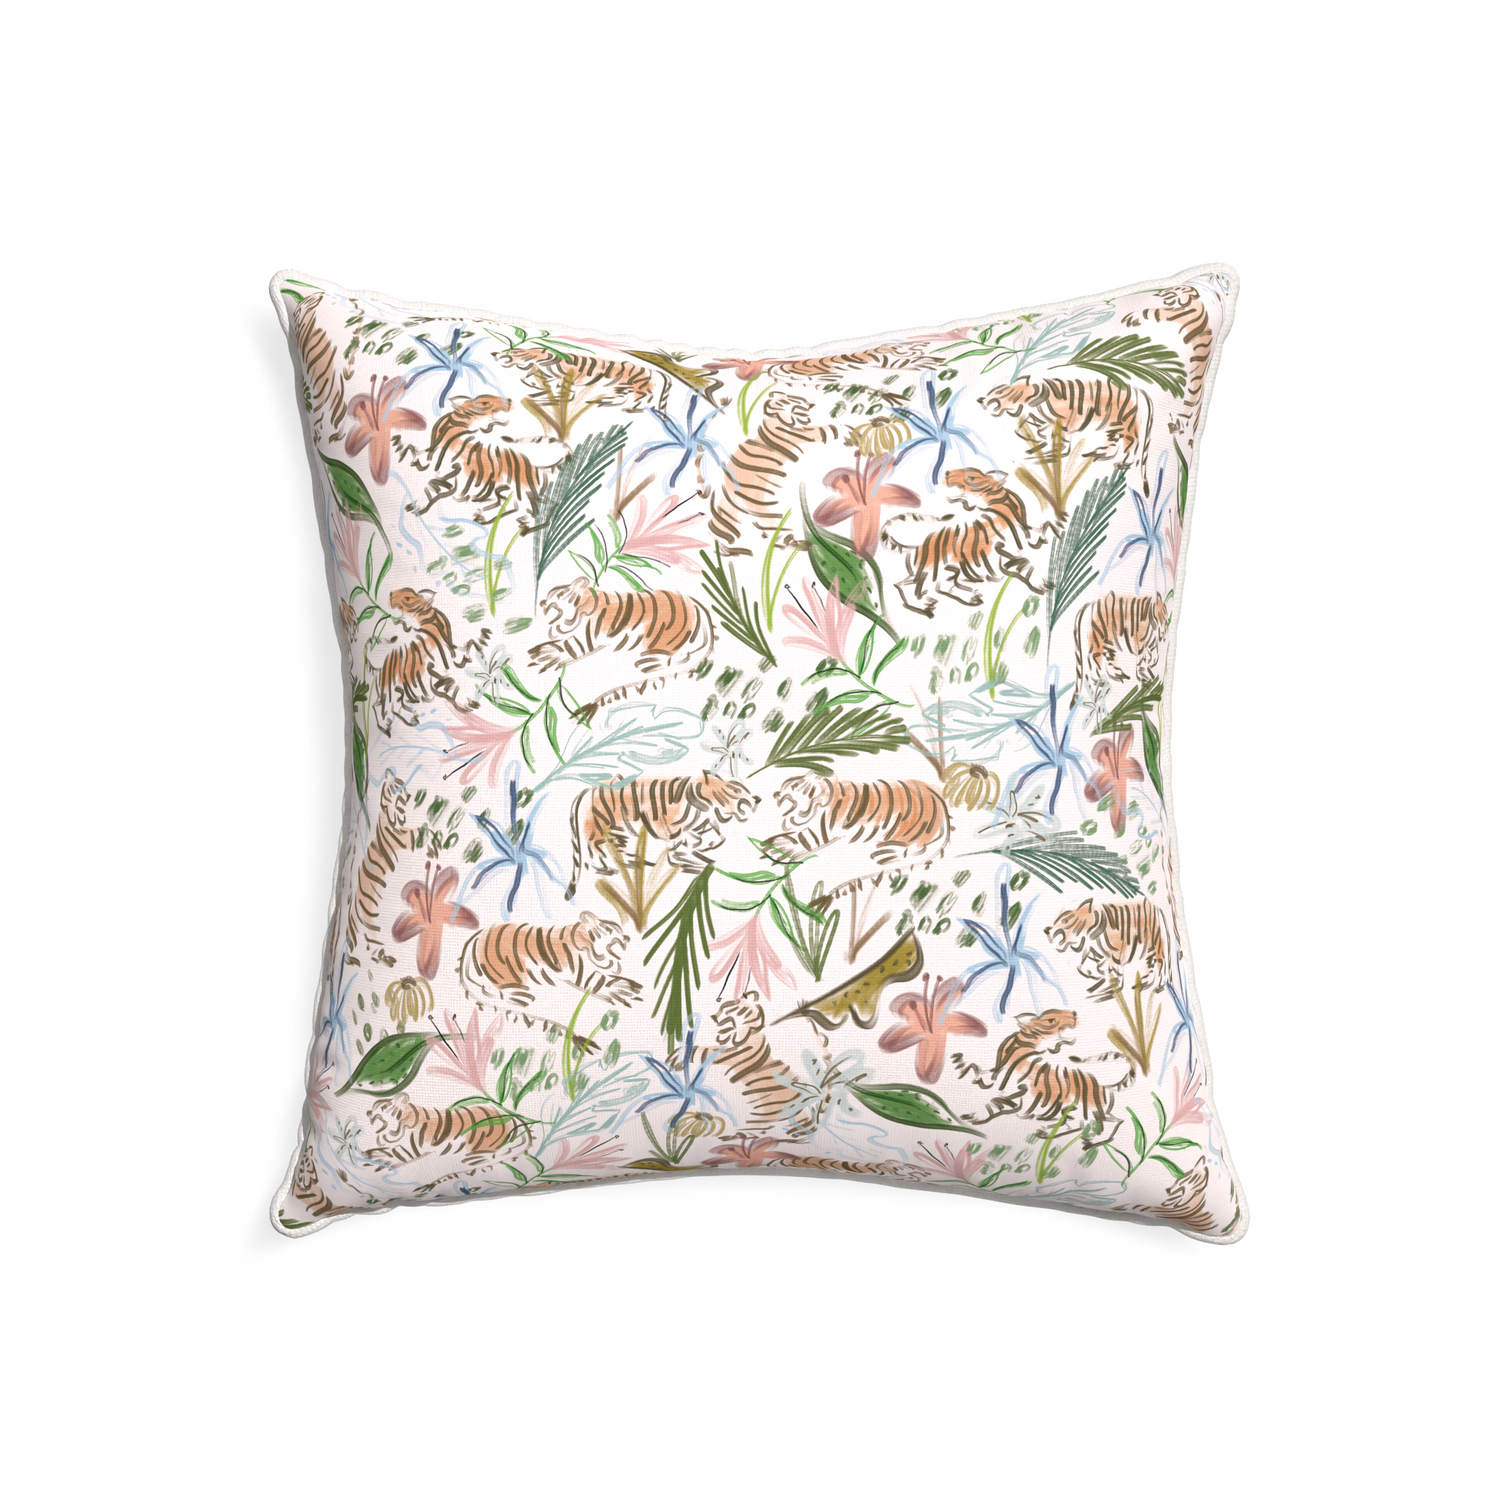 22-square frida pink custom pink chinoiserie tigerpillow with snow piping on white background